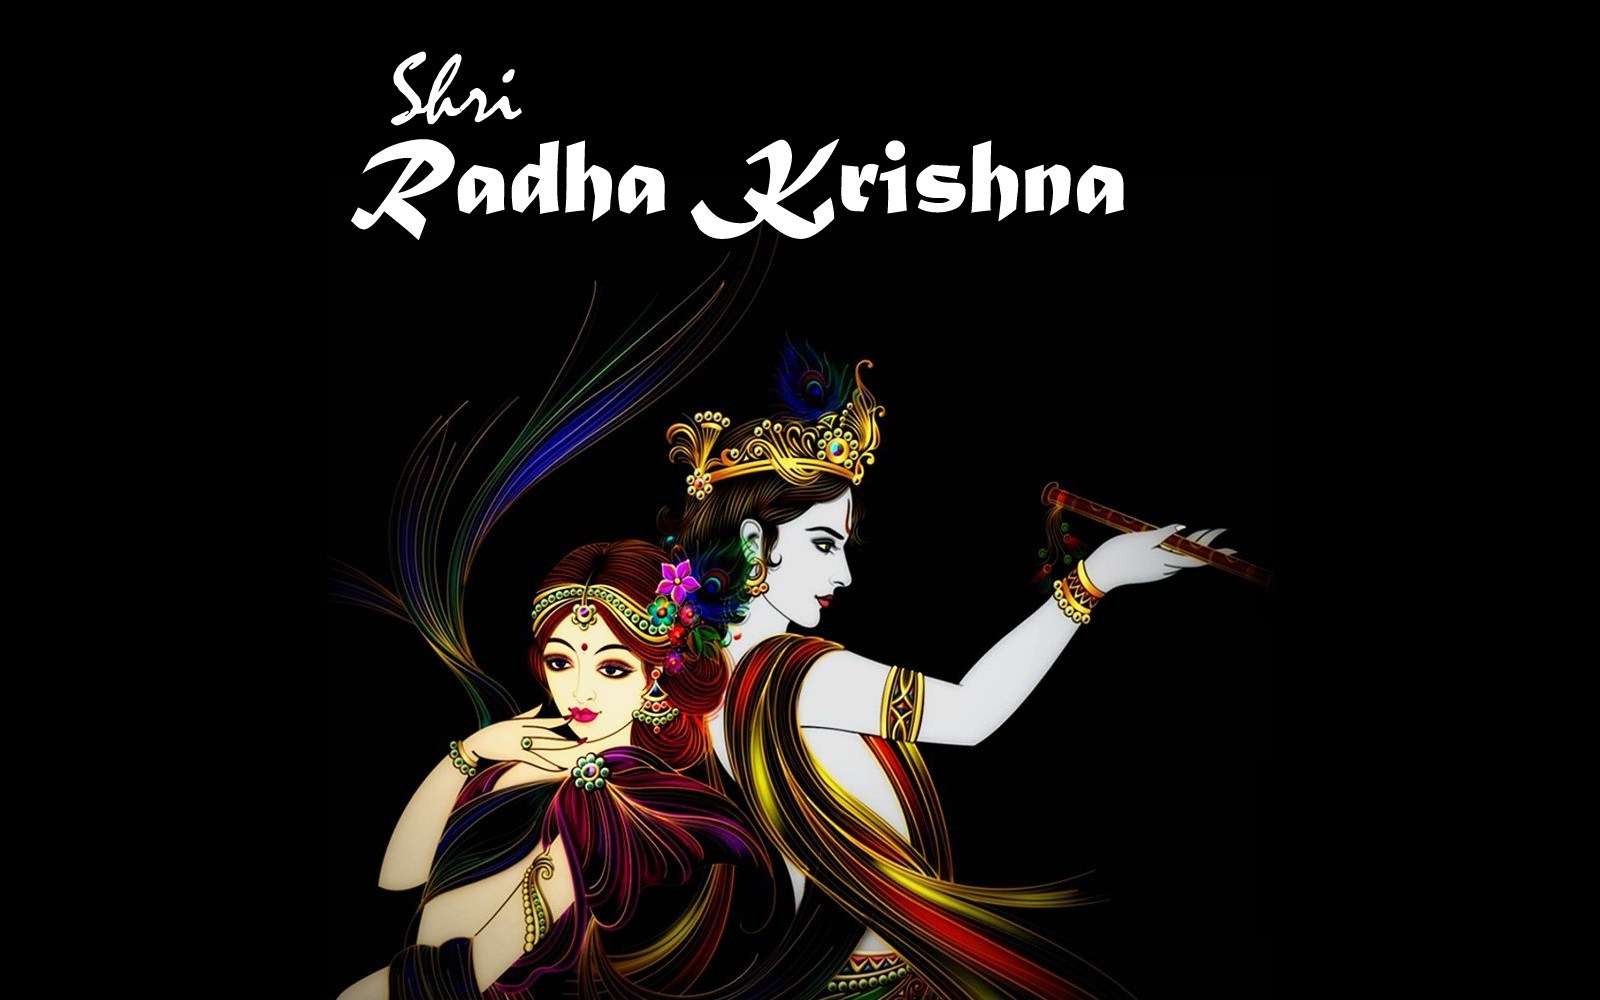 Best Awesome & Cool Hd Wallpaper Of Shri Radha Krishna - Shri Radhe Krishna Hd , HD Wallpaper & Backgrounds